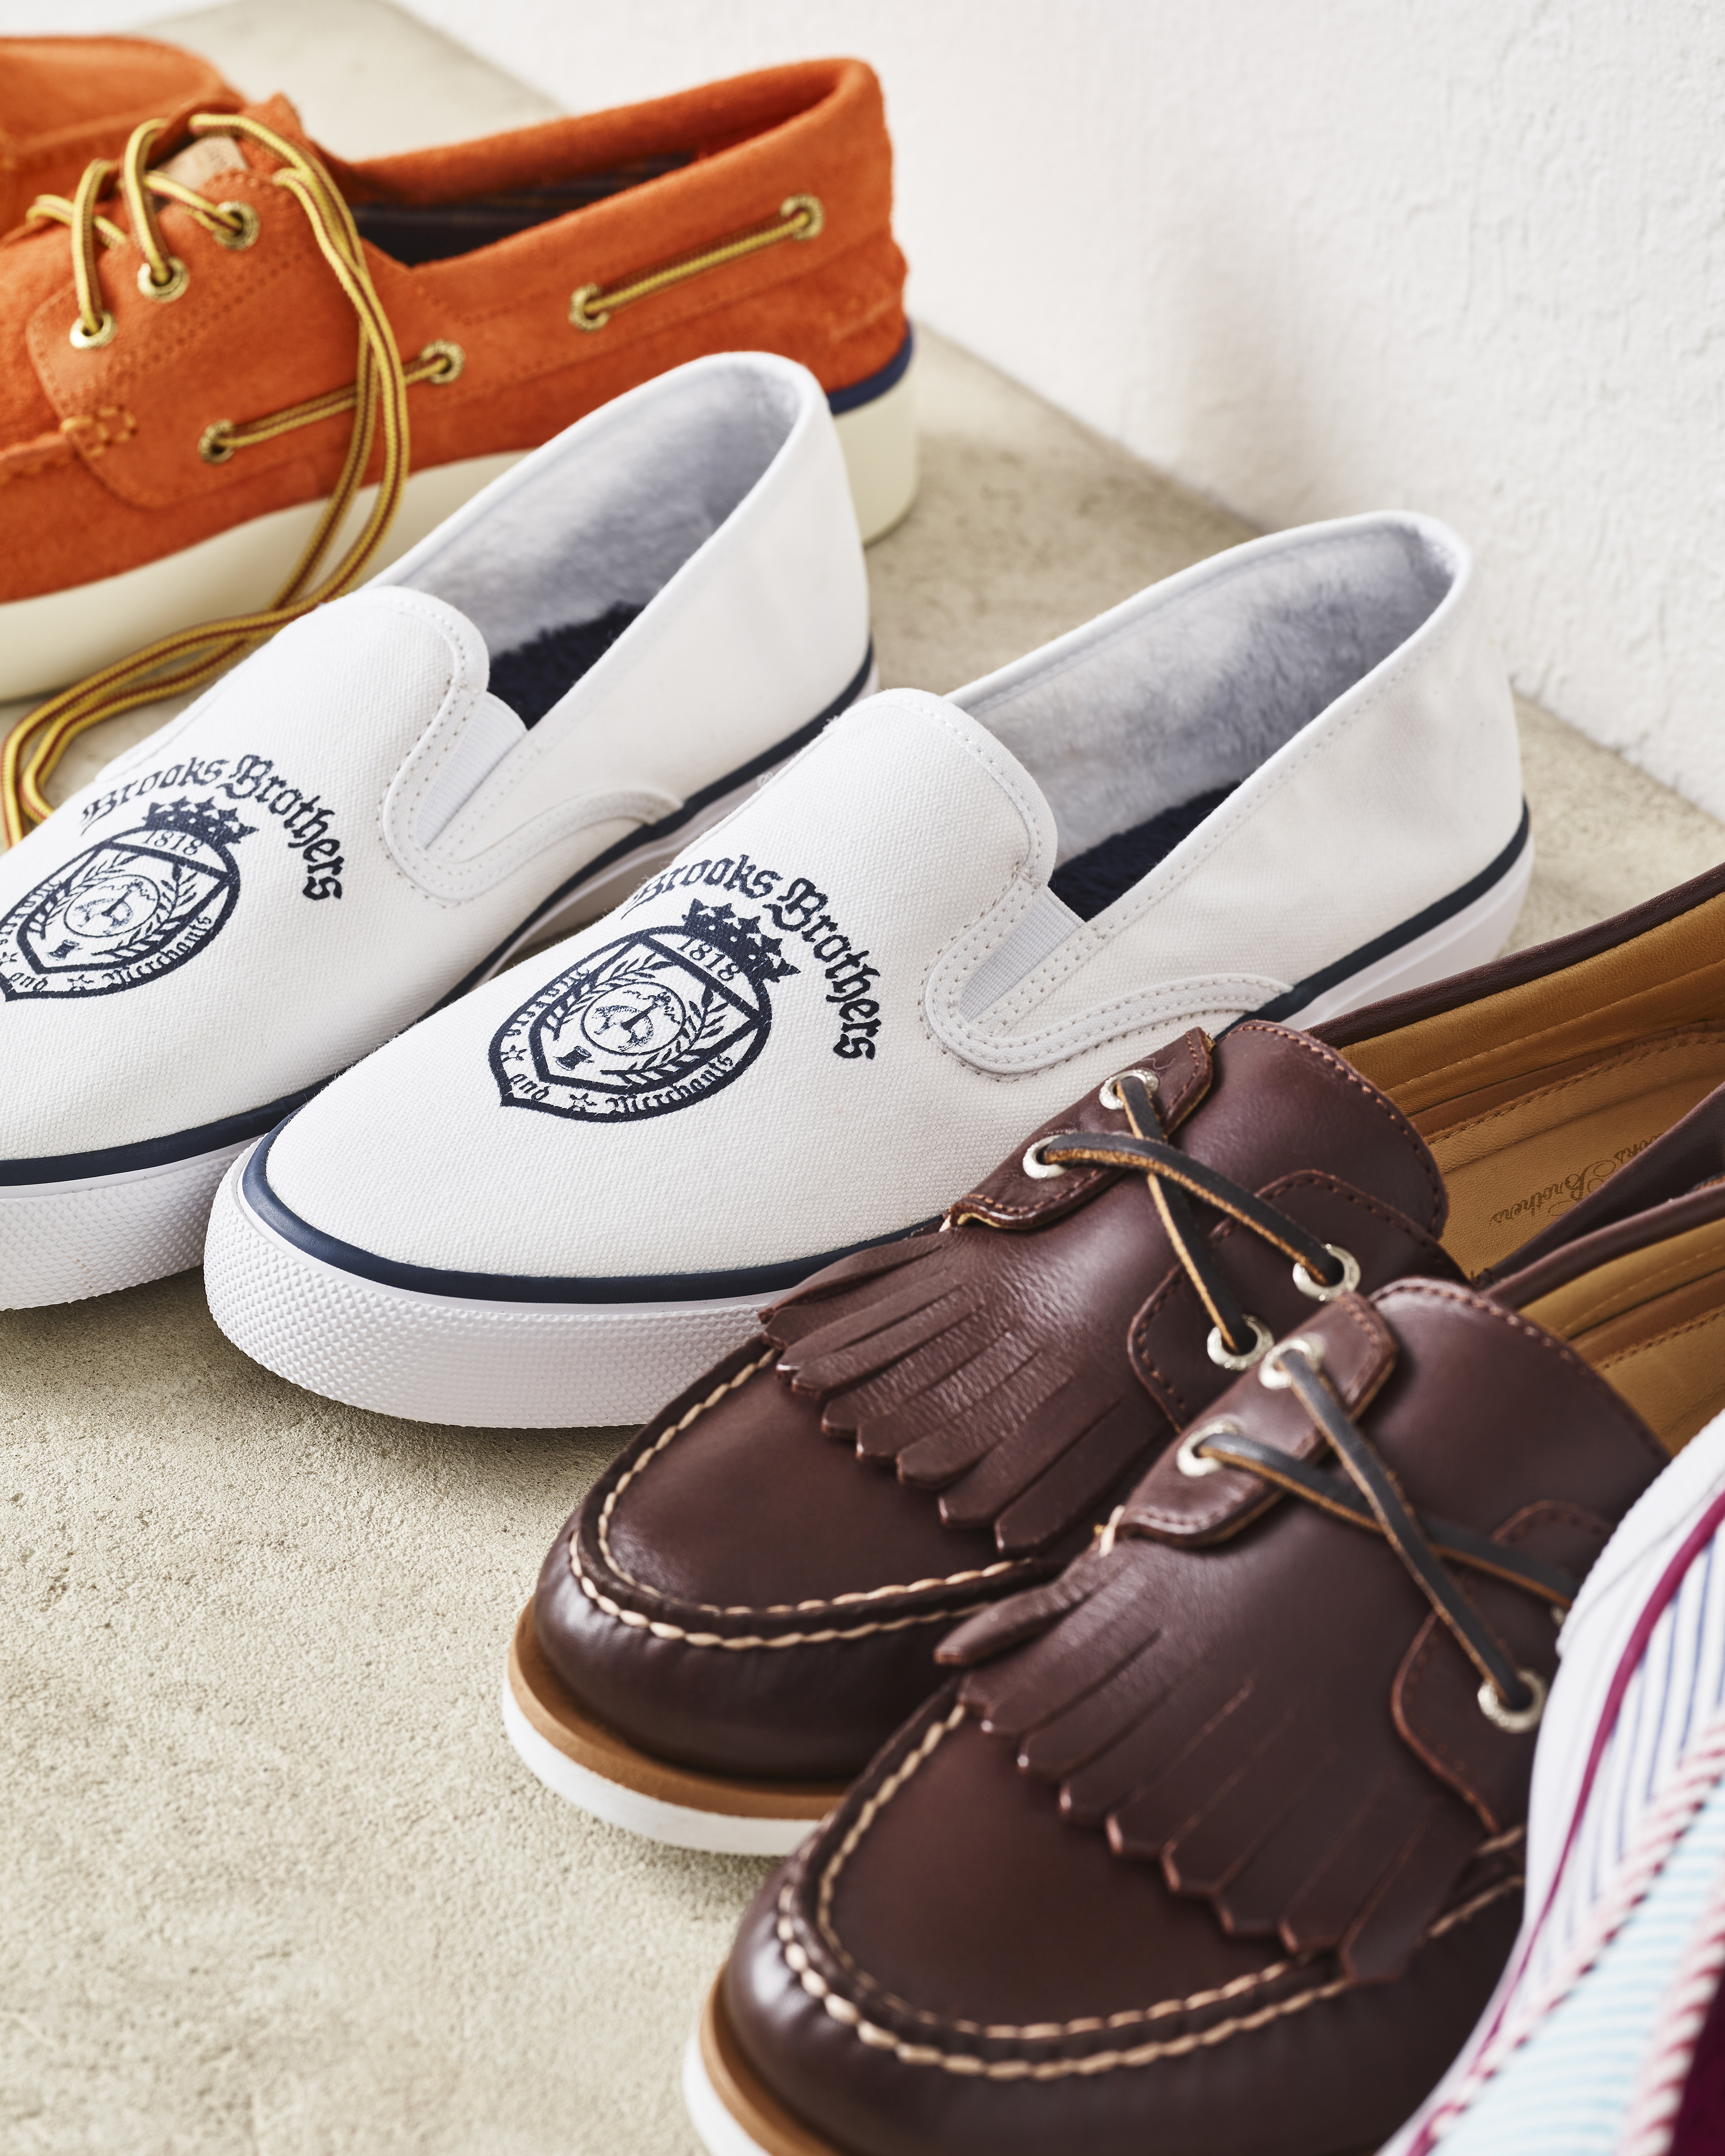 This Sperry x Brooks Brothers collaboration is a preppy-lover's dream, Golf Equipment: Clubs, Balls, Bags